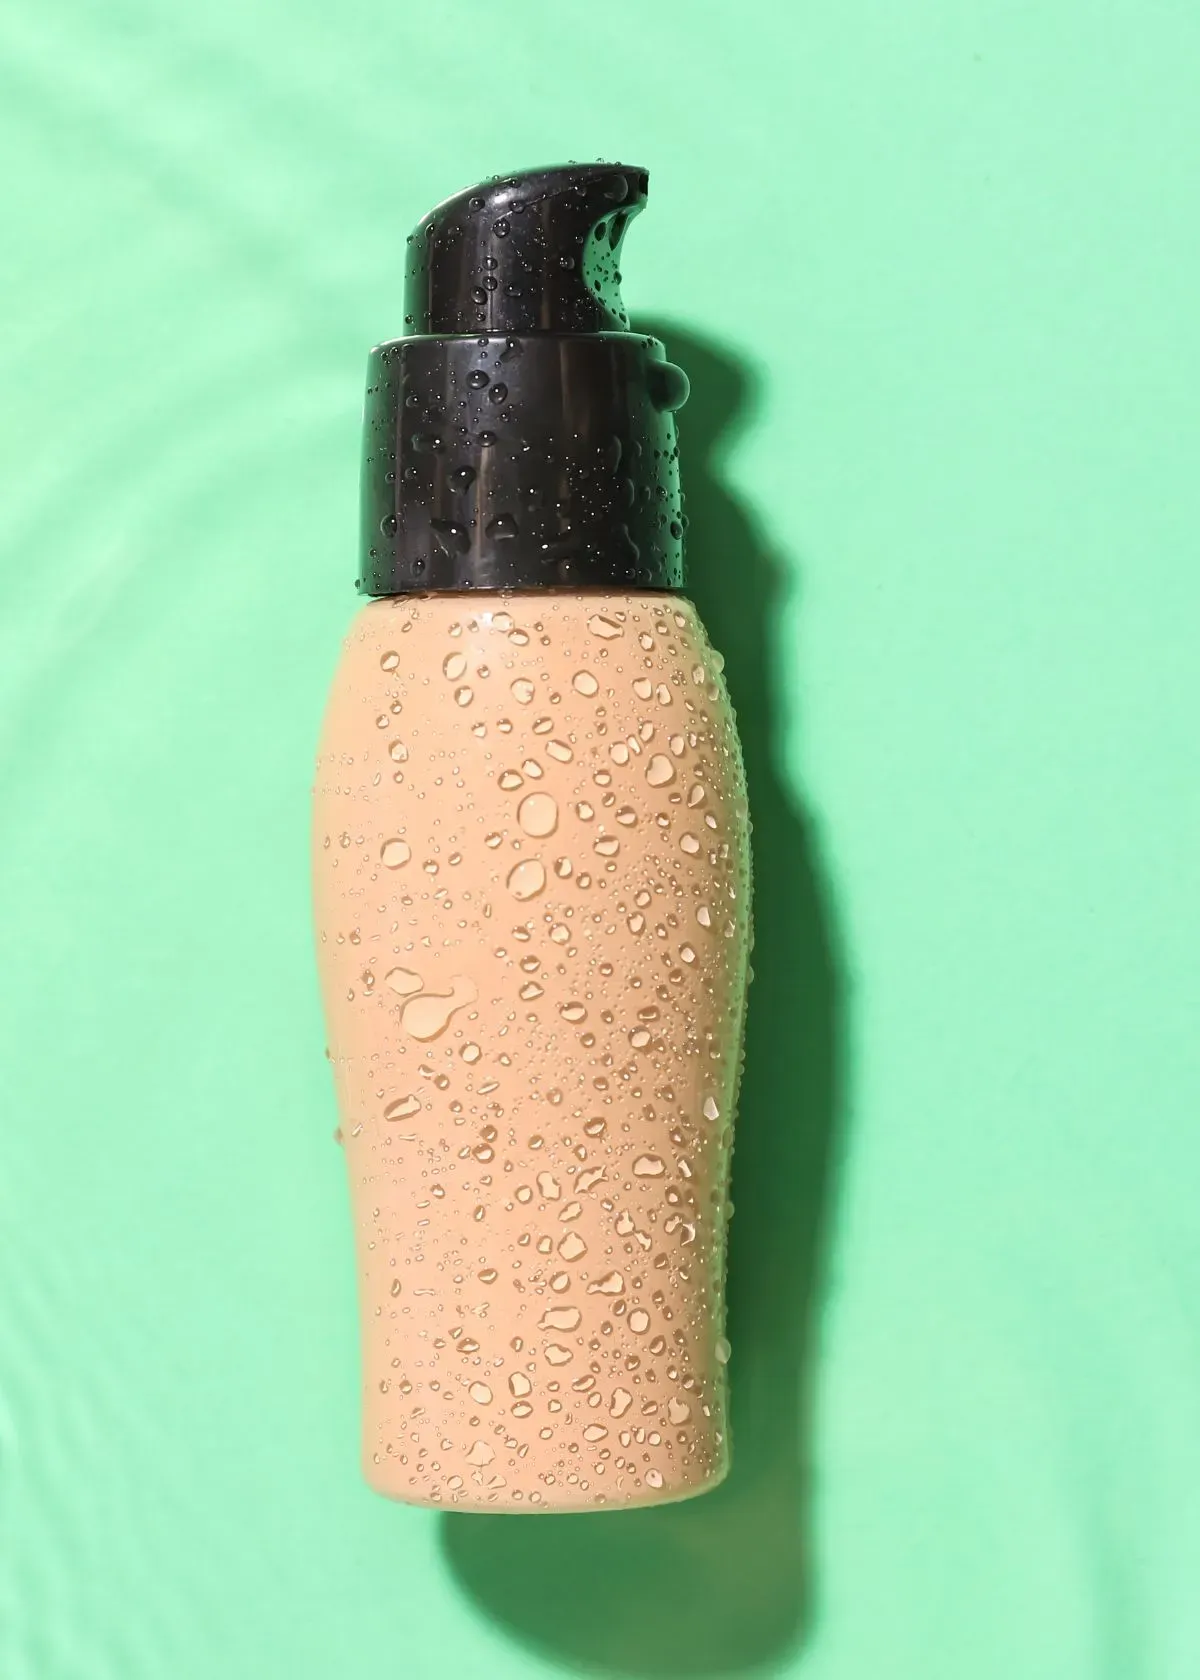 How to Tell If Foundation Is Water Based?